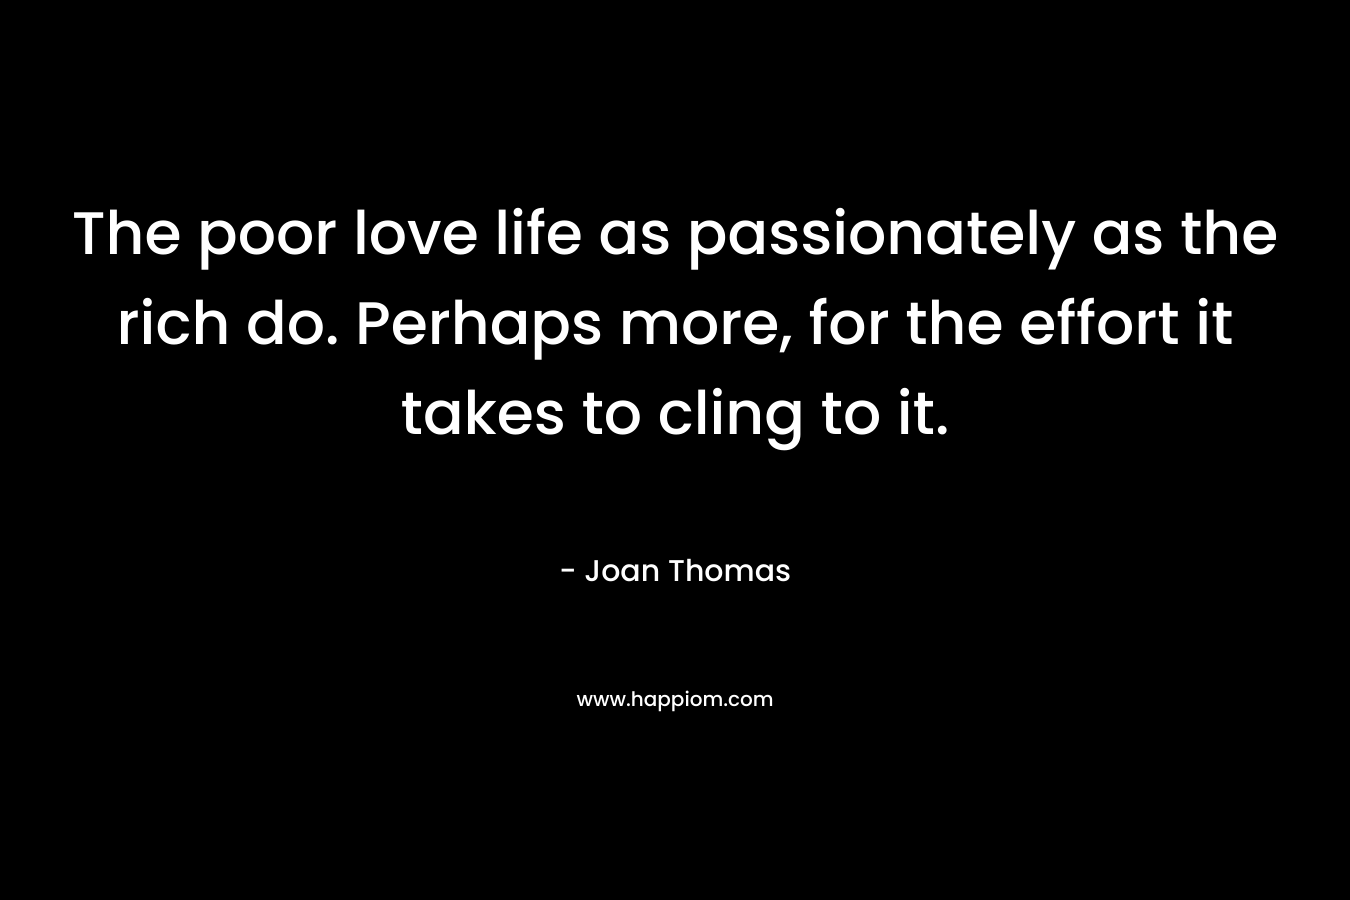 The poor love life as passionately as the rich do. Perhaps more, for the effort it takes to cling to it. – Joan Thomas